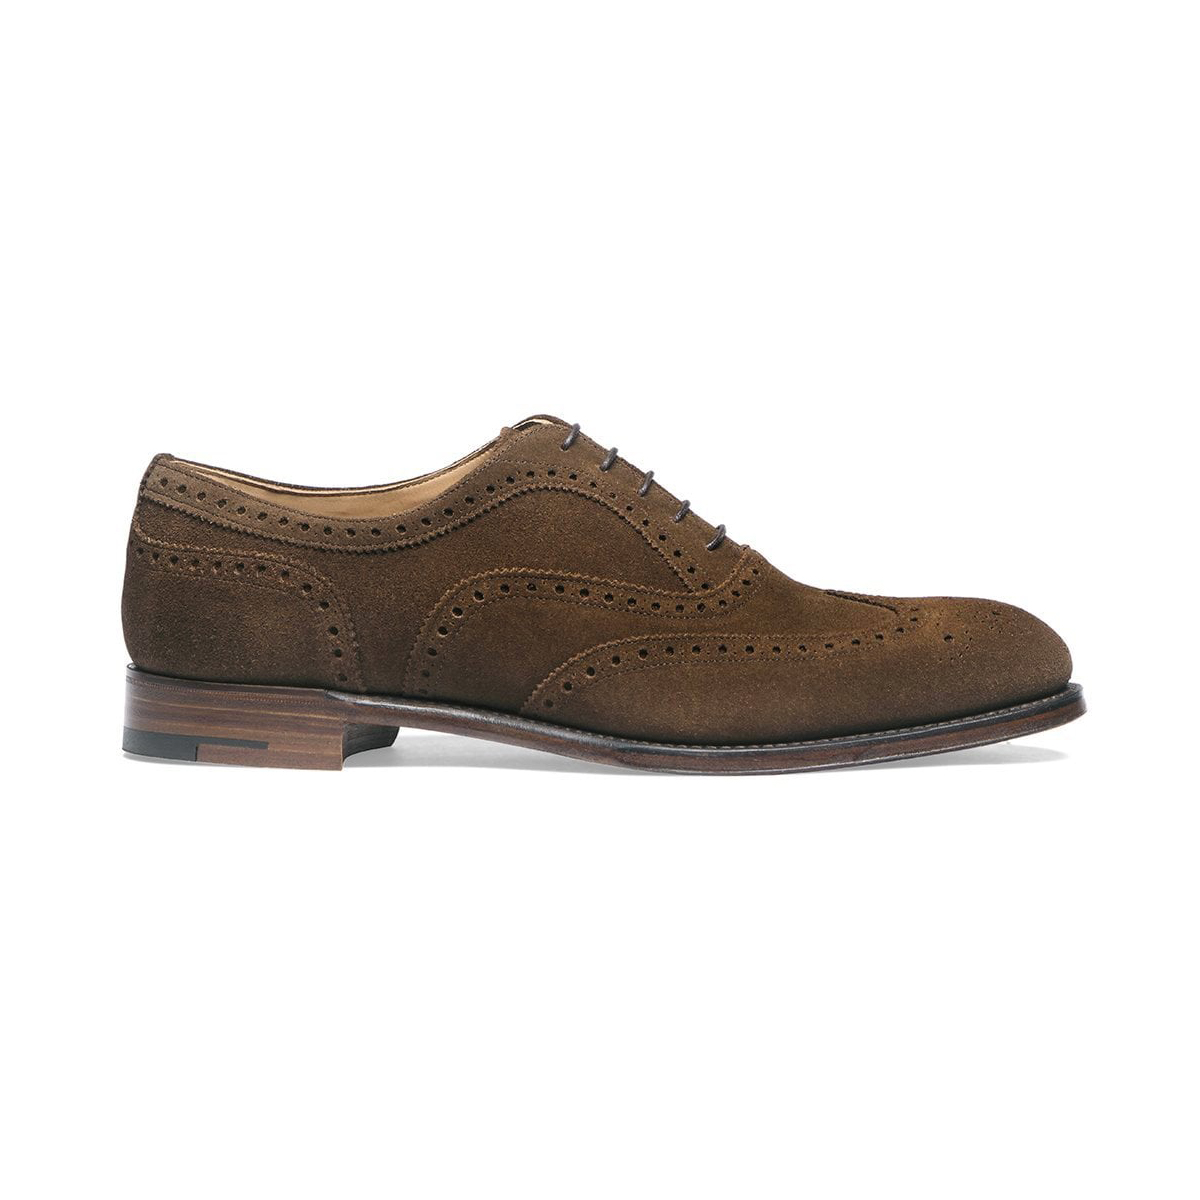 Cheaney Arthur III Plough Suede Oxford Brogues - Bowhill & Elliott